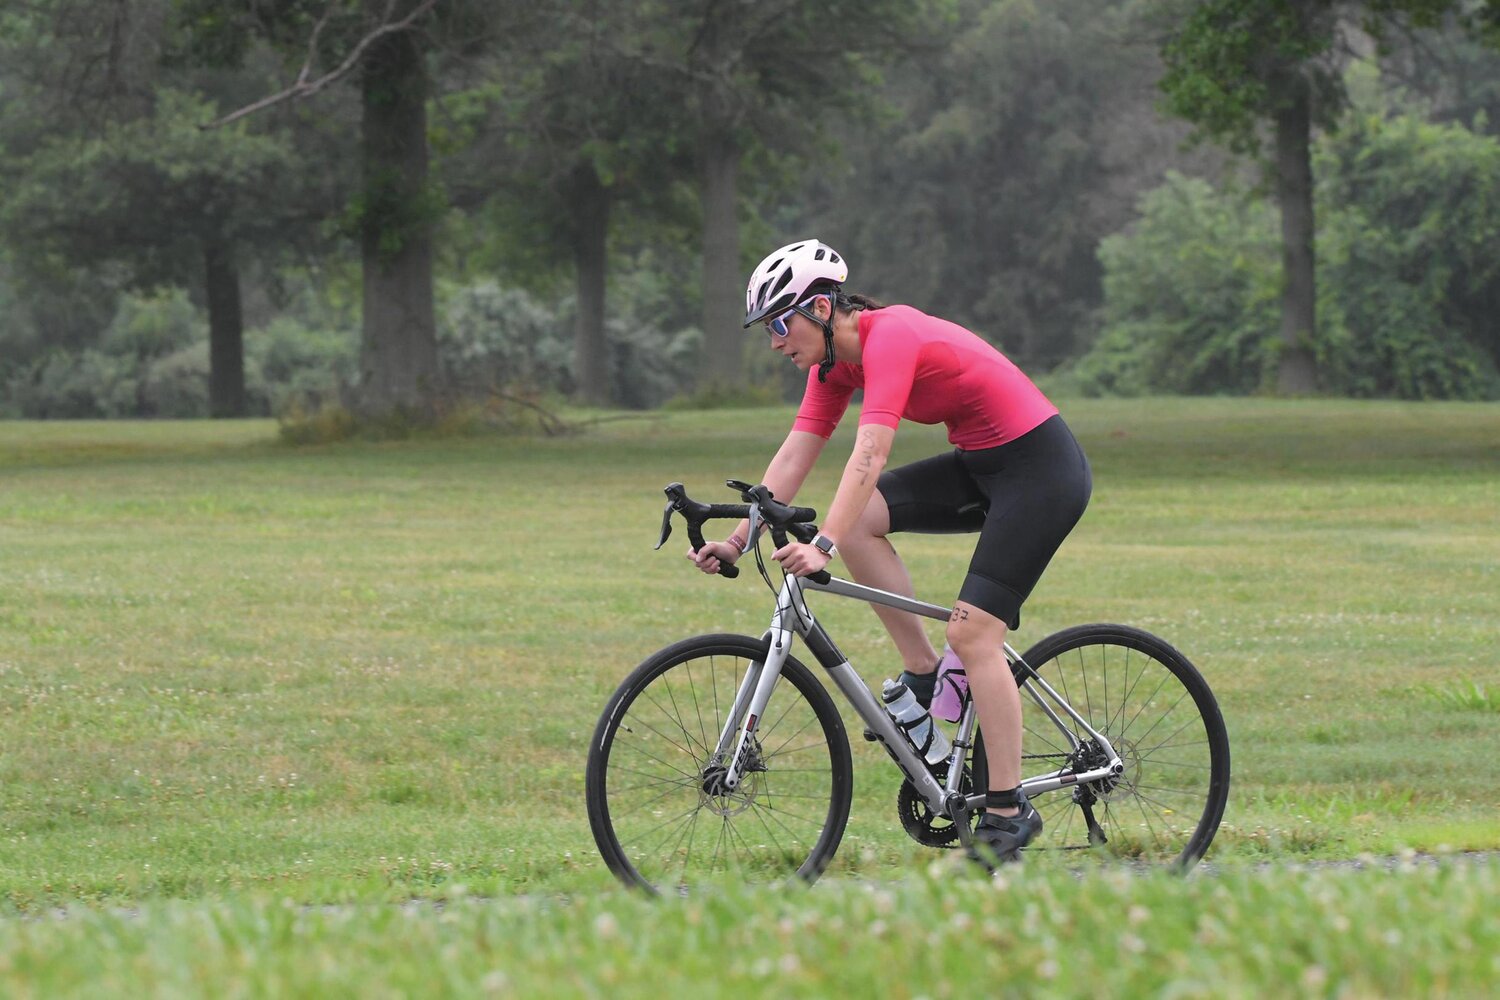 Richboro's Jennifer Steen competes on the bicycle course in the New Jersey State Triathlon 40-44 age group.